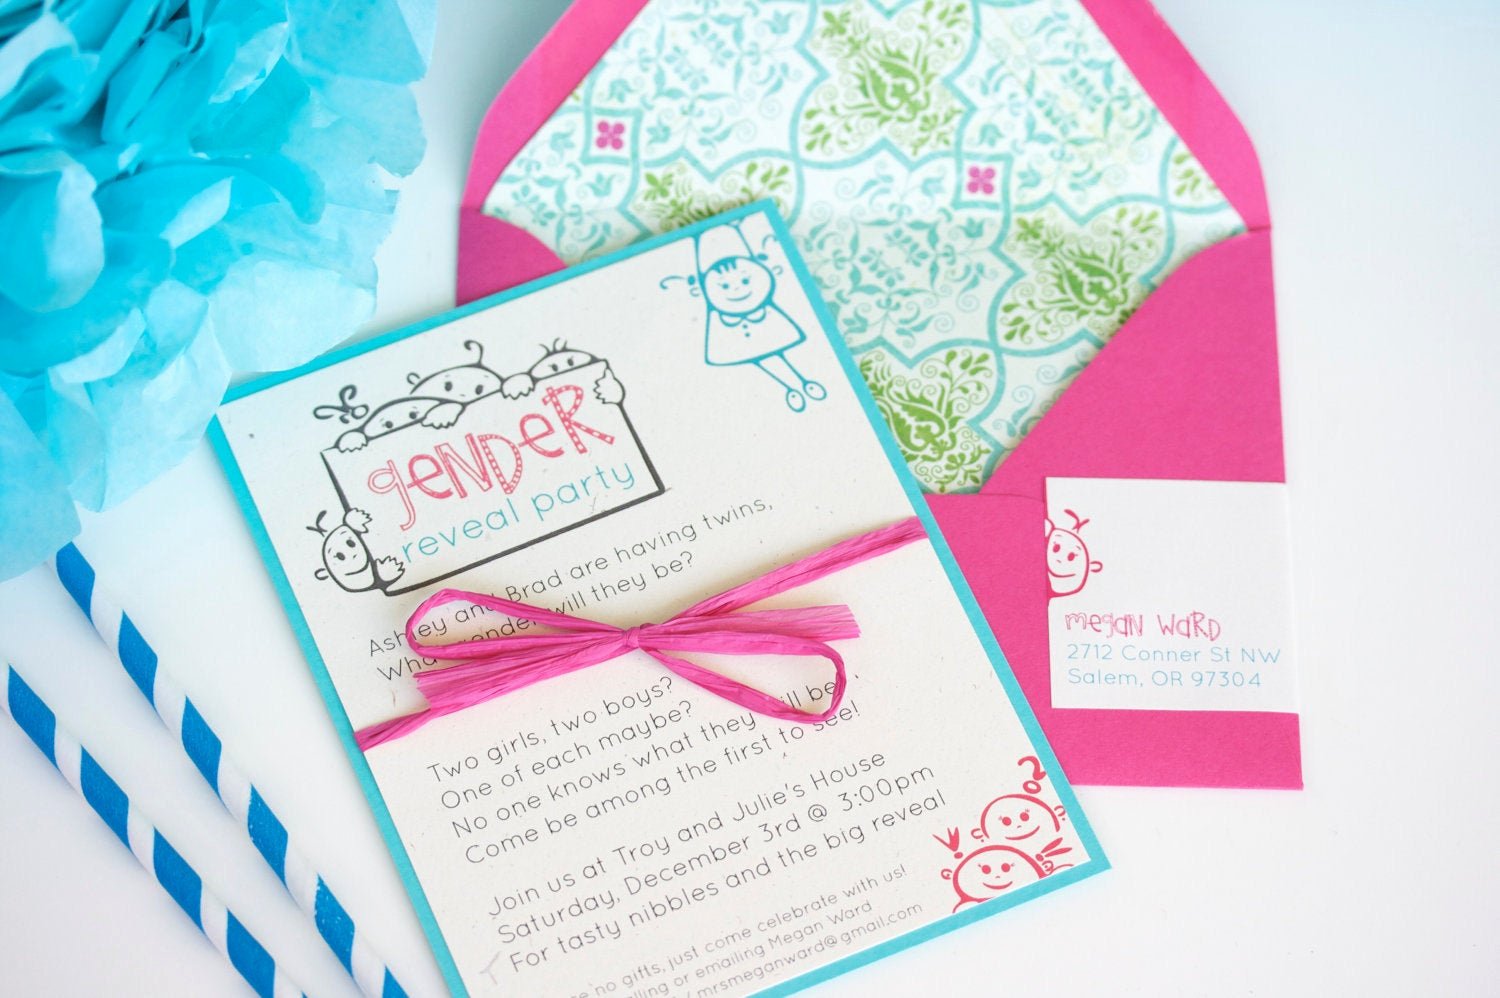 gender reveal party invitation